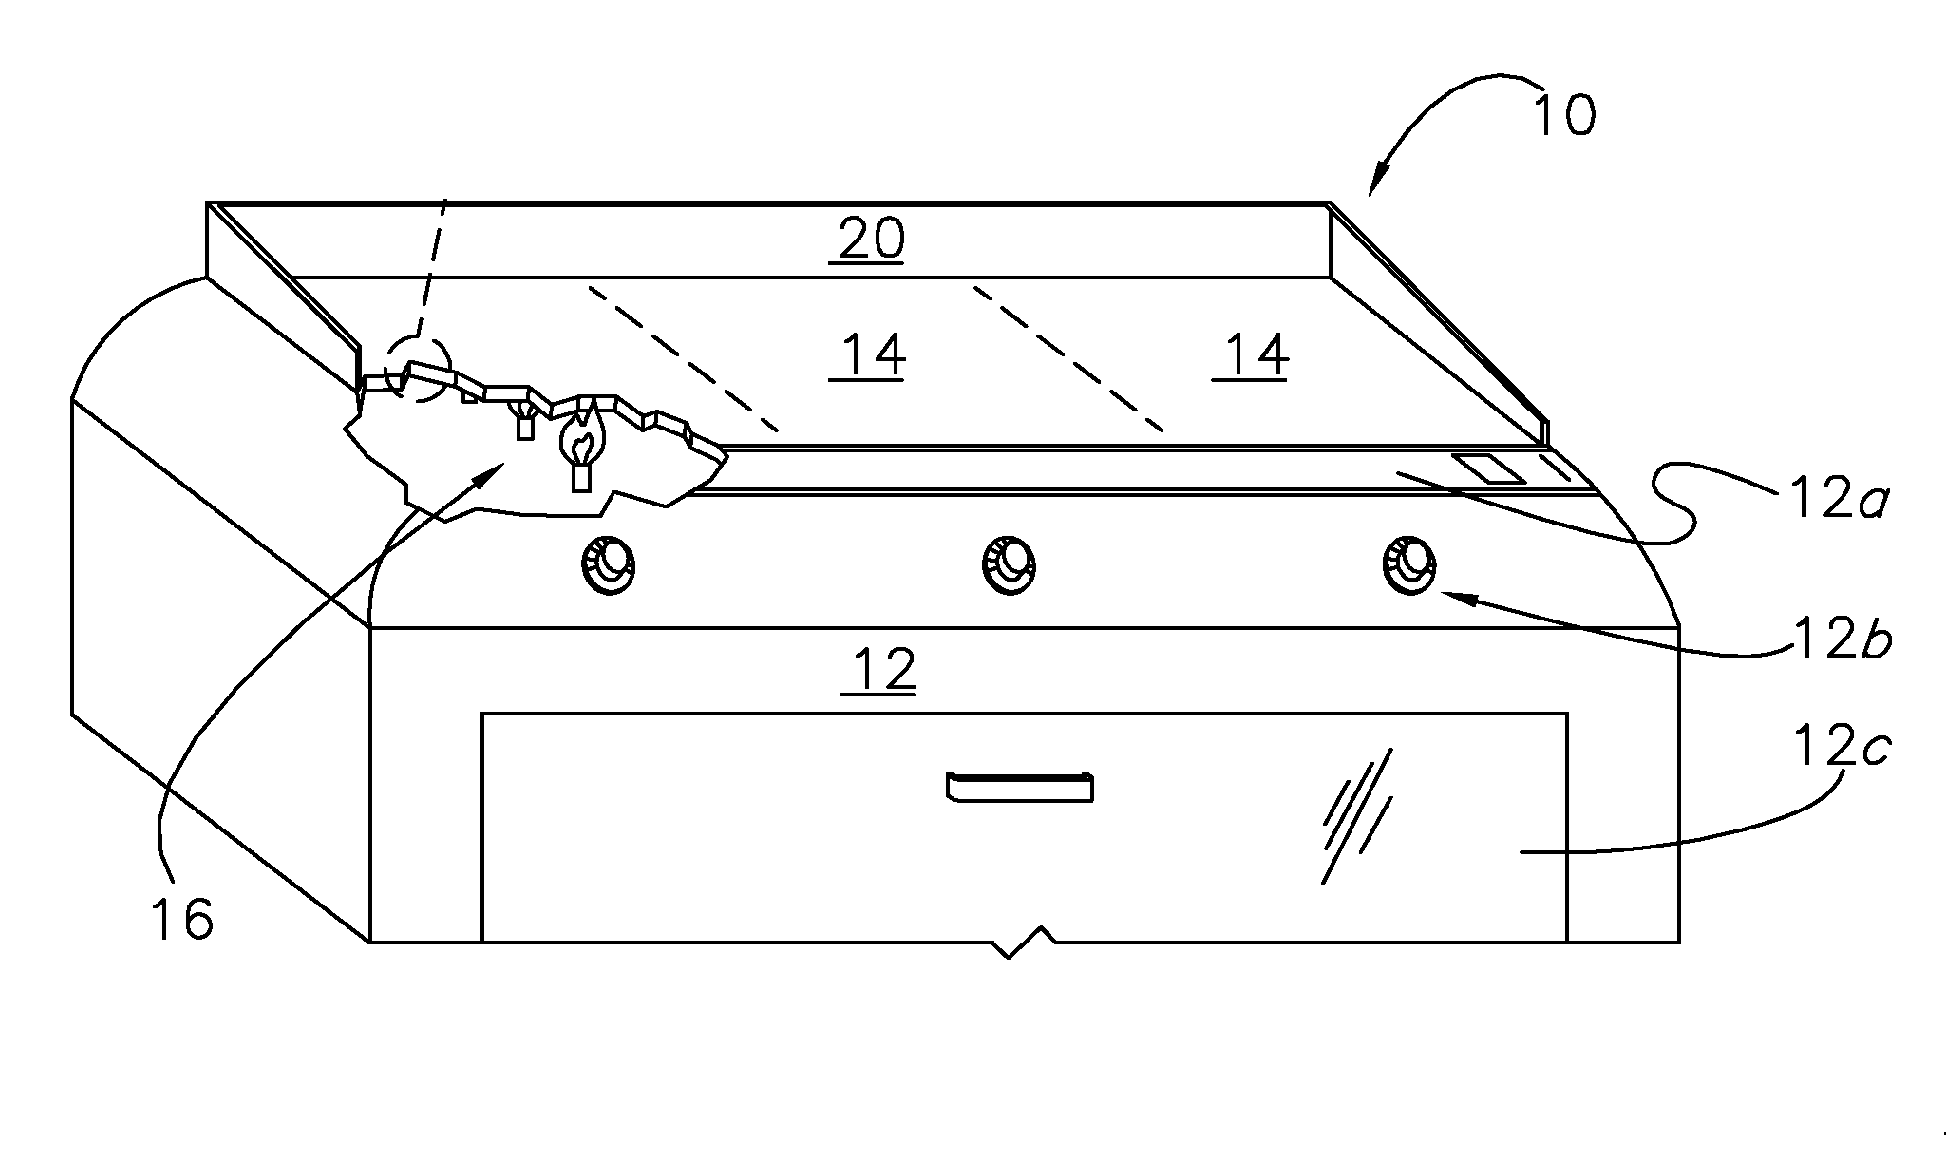 Multi-zone composite cooking griddle with unitary thermally conductive plate